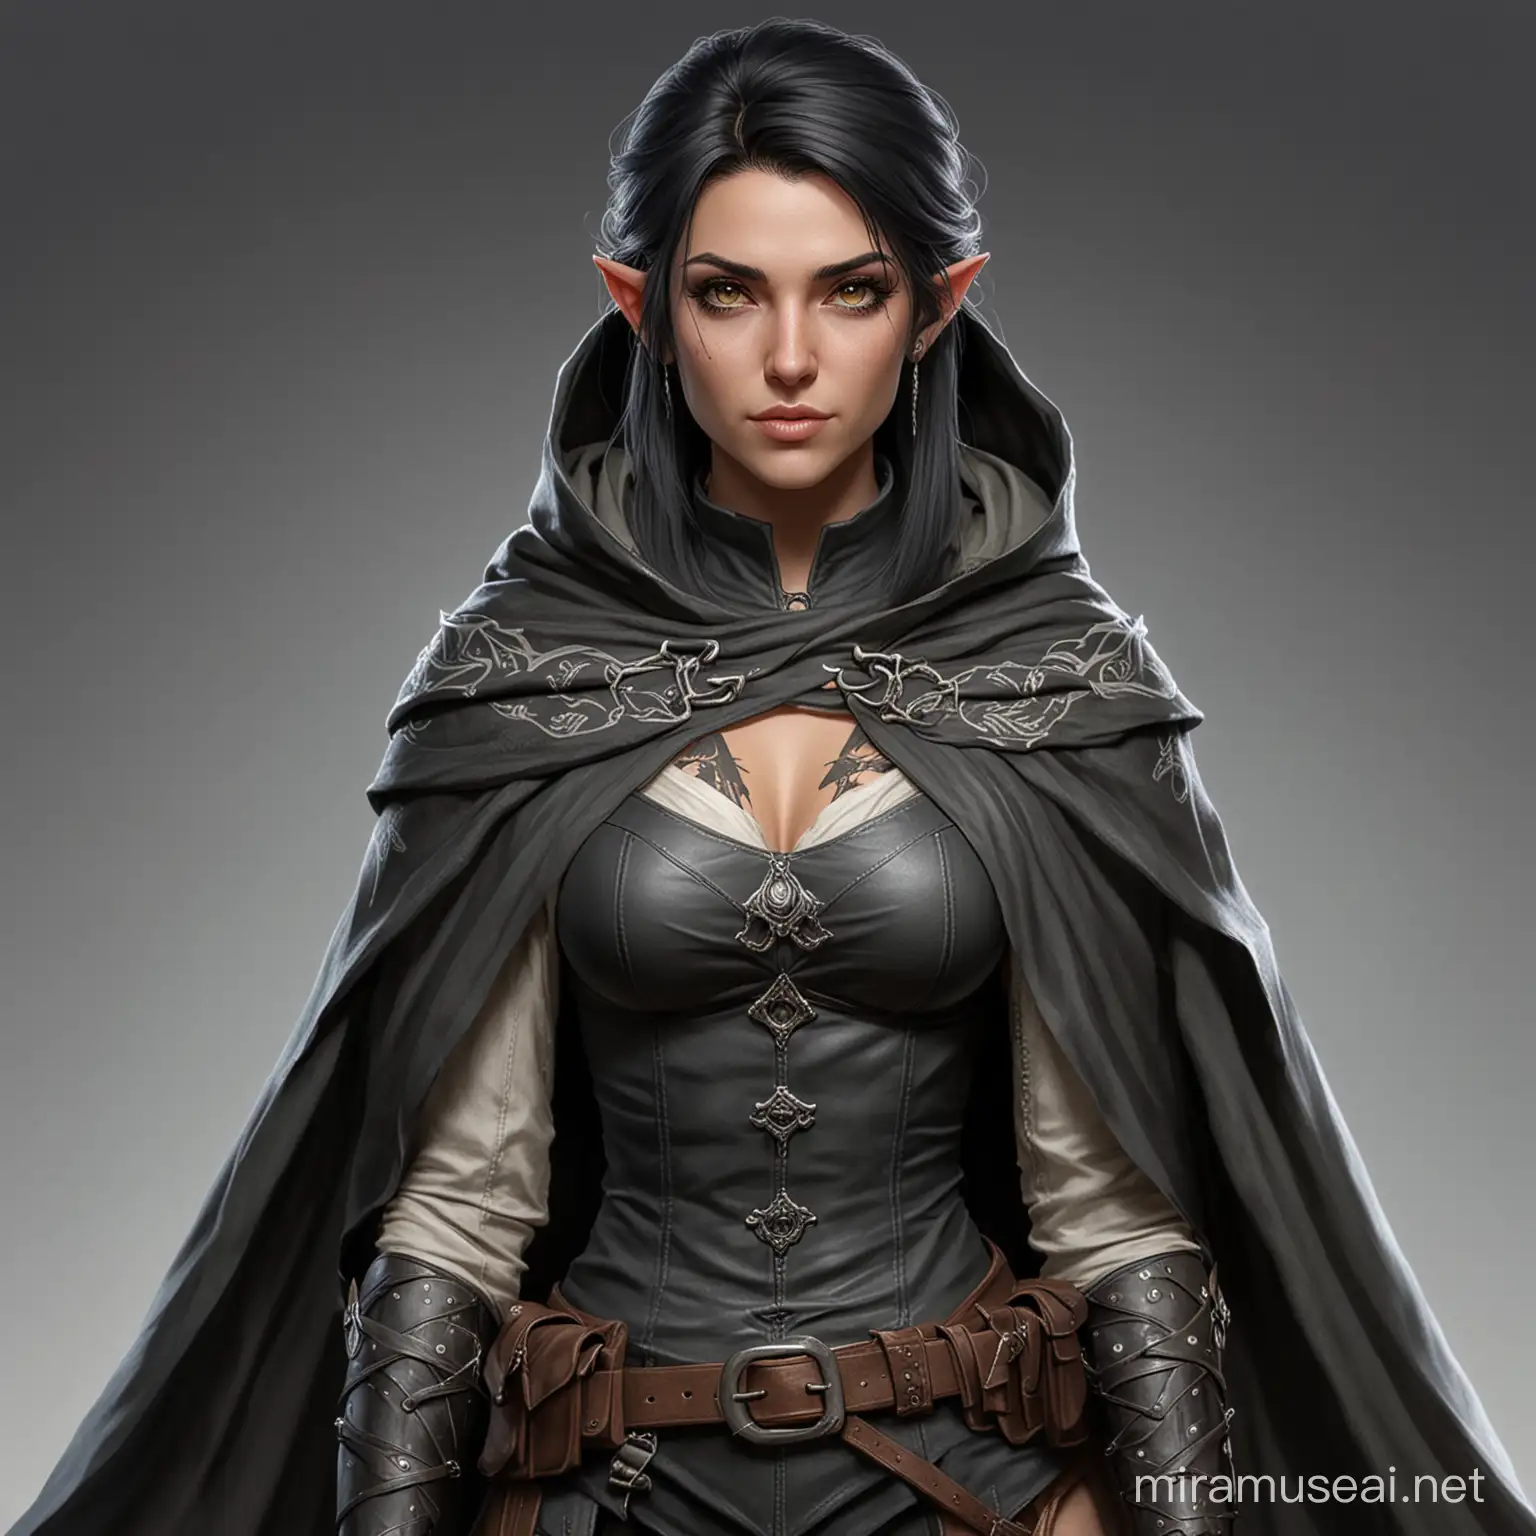 Full Body Female Ranger Aged Pale Elf with Black Hair and Tattoos in Cape Cloak